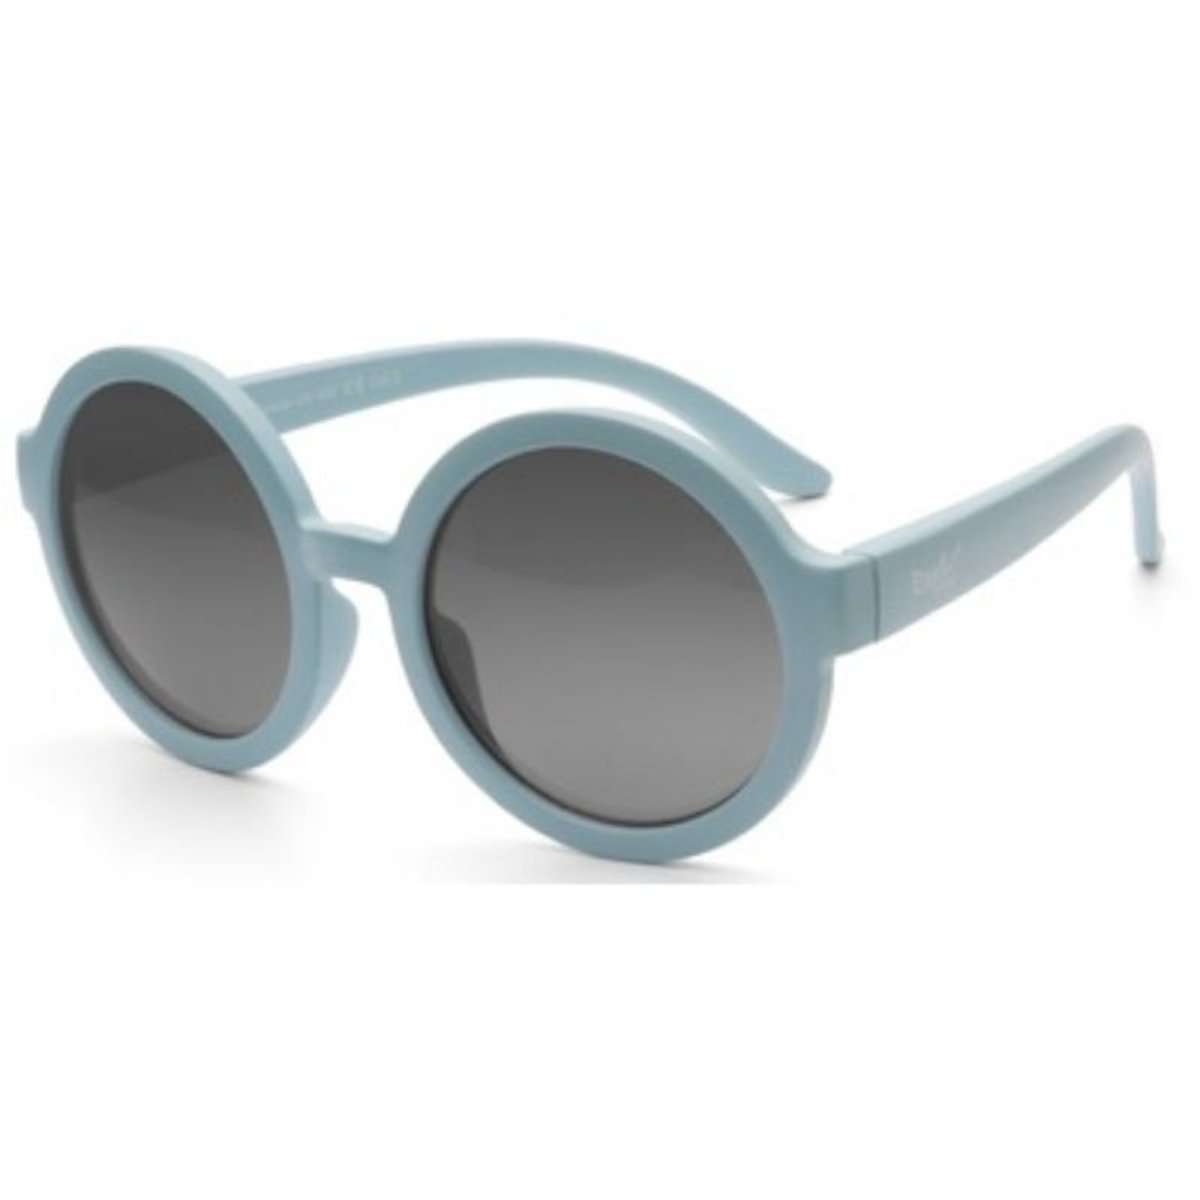 Real Shades - UV-zonnebril voor kinderen - Vibe - Mat Cool Blauw - maat Onesize (2-4yrs)